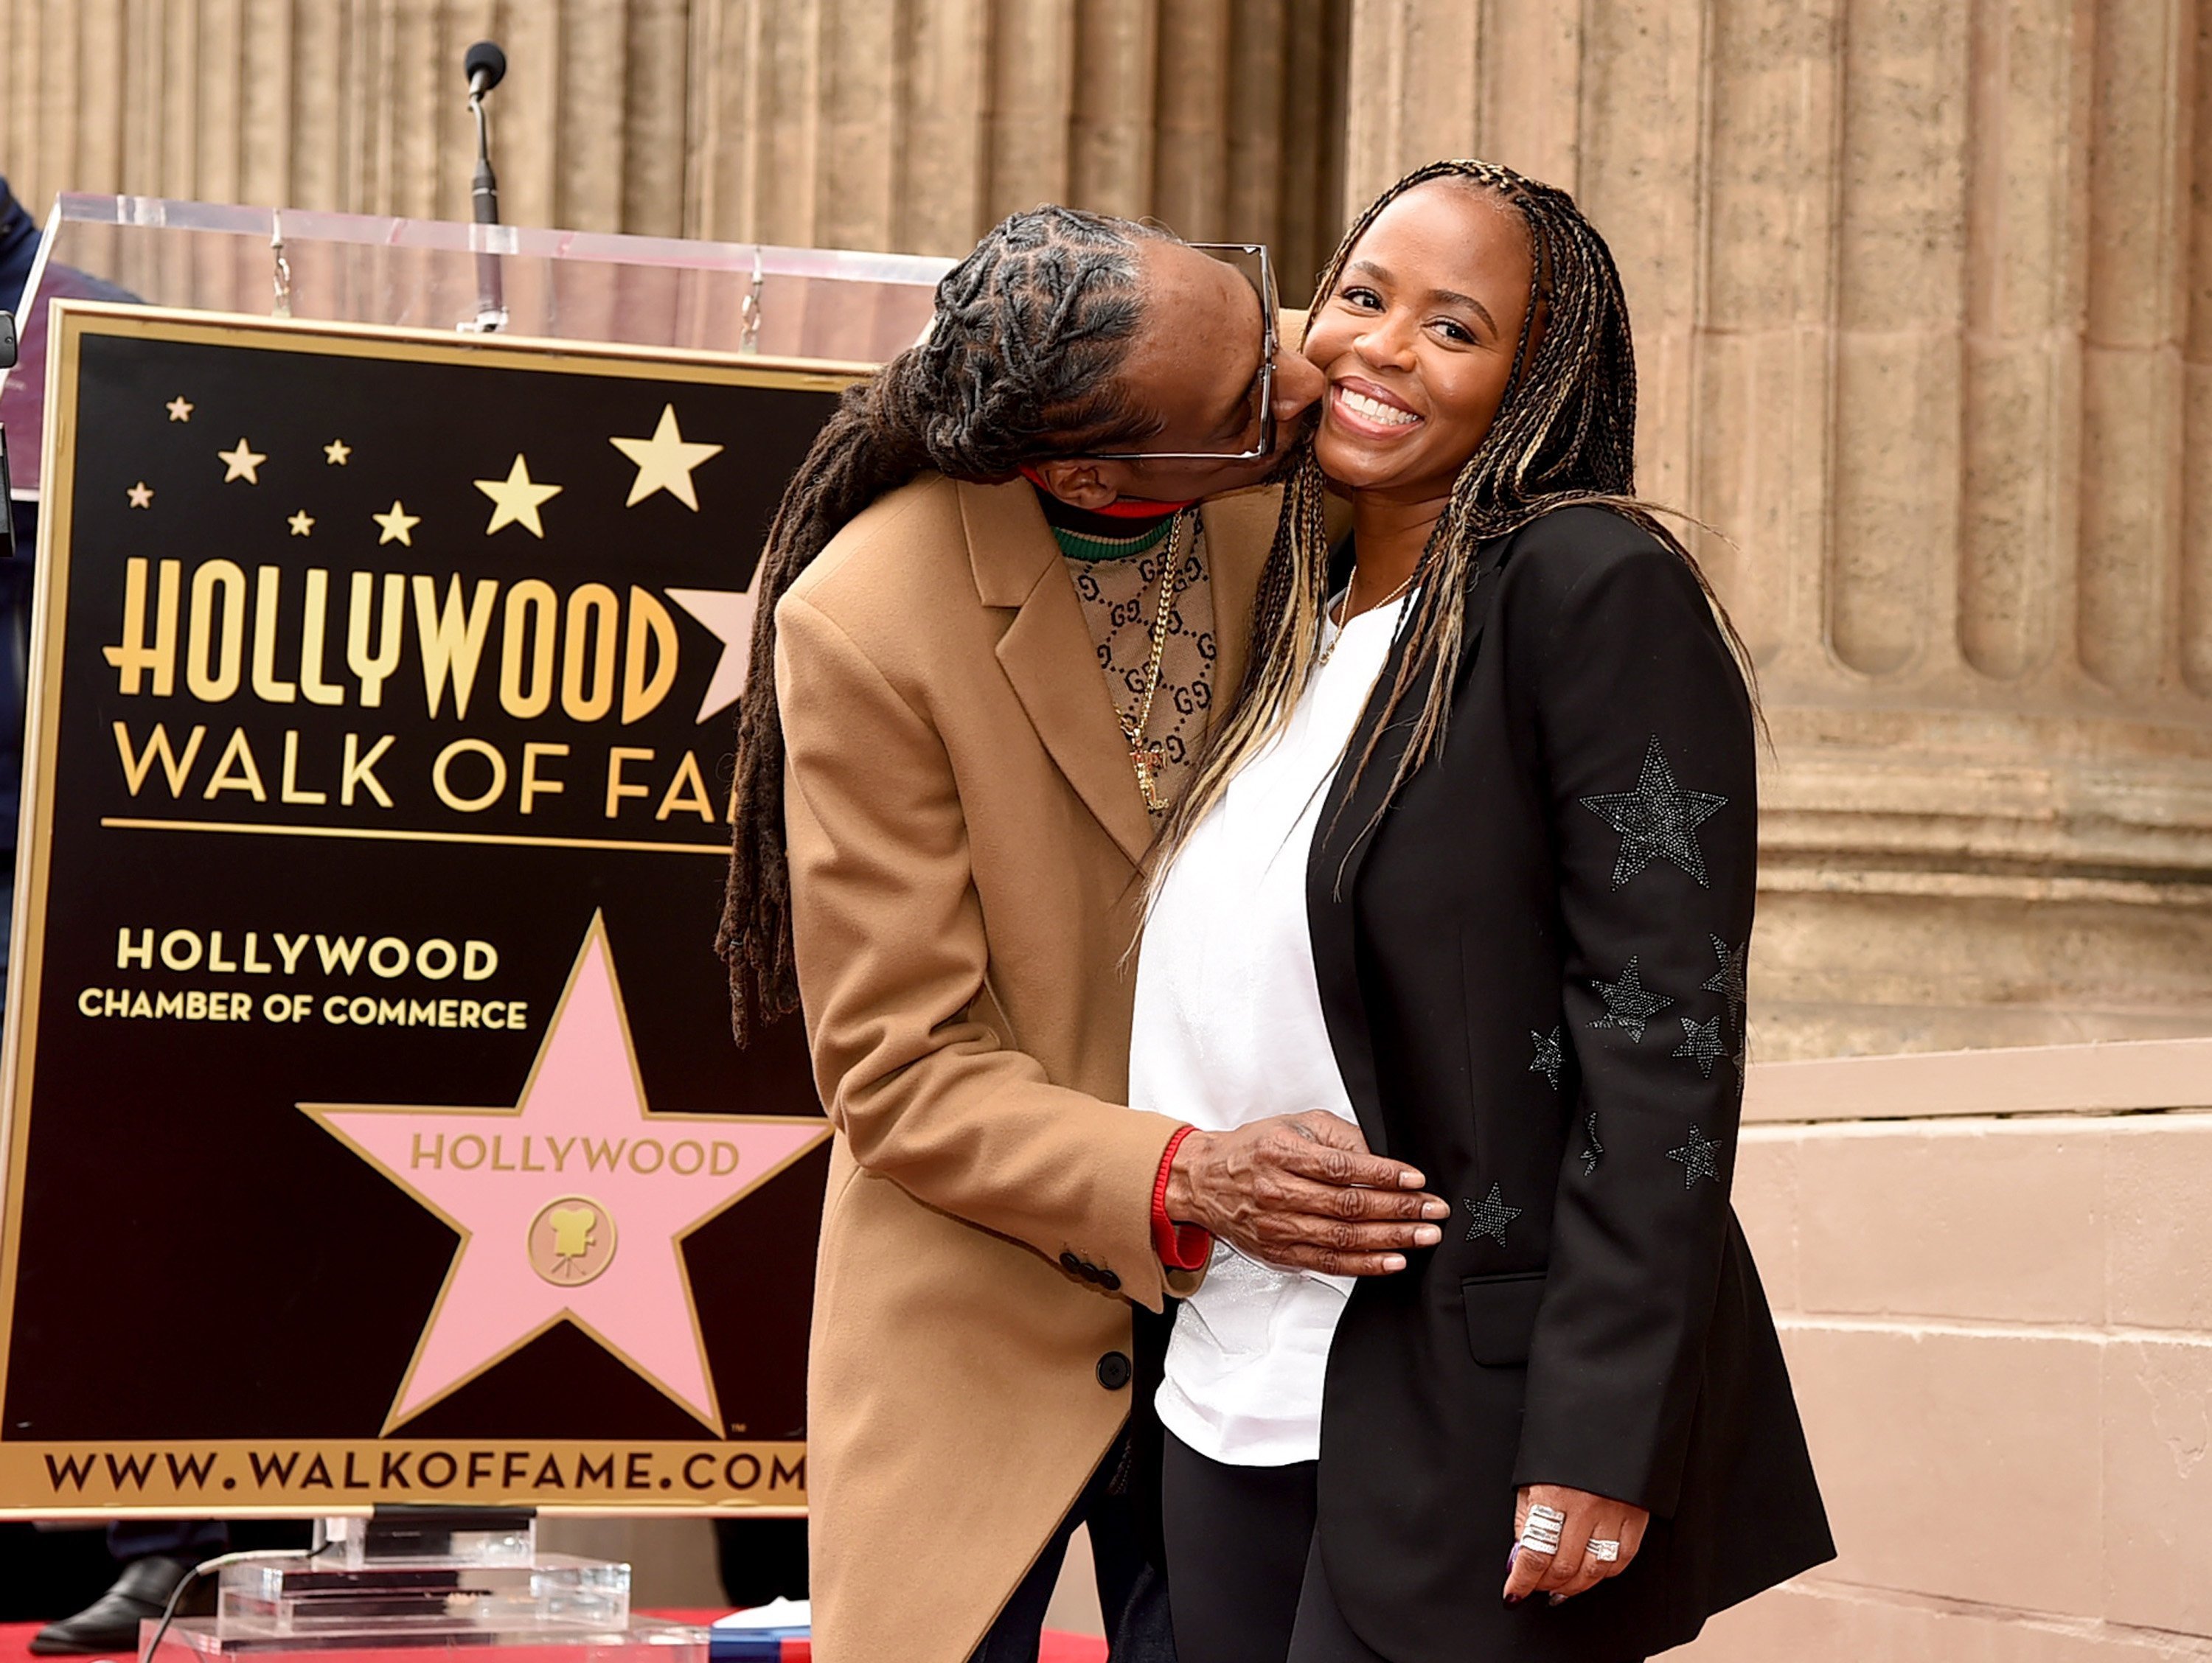 Snoop Dogg, with his wife Shante Broadus, is honored with a star on The Hollywood Walk Of Fame on Hollywood Boulevard on November 19, 2018 | Photo: GettyImages